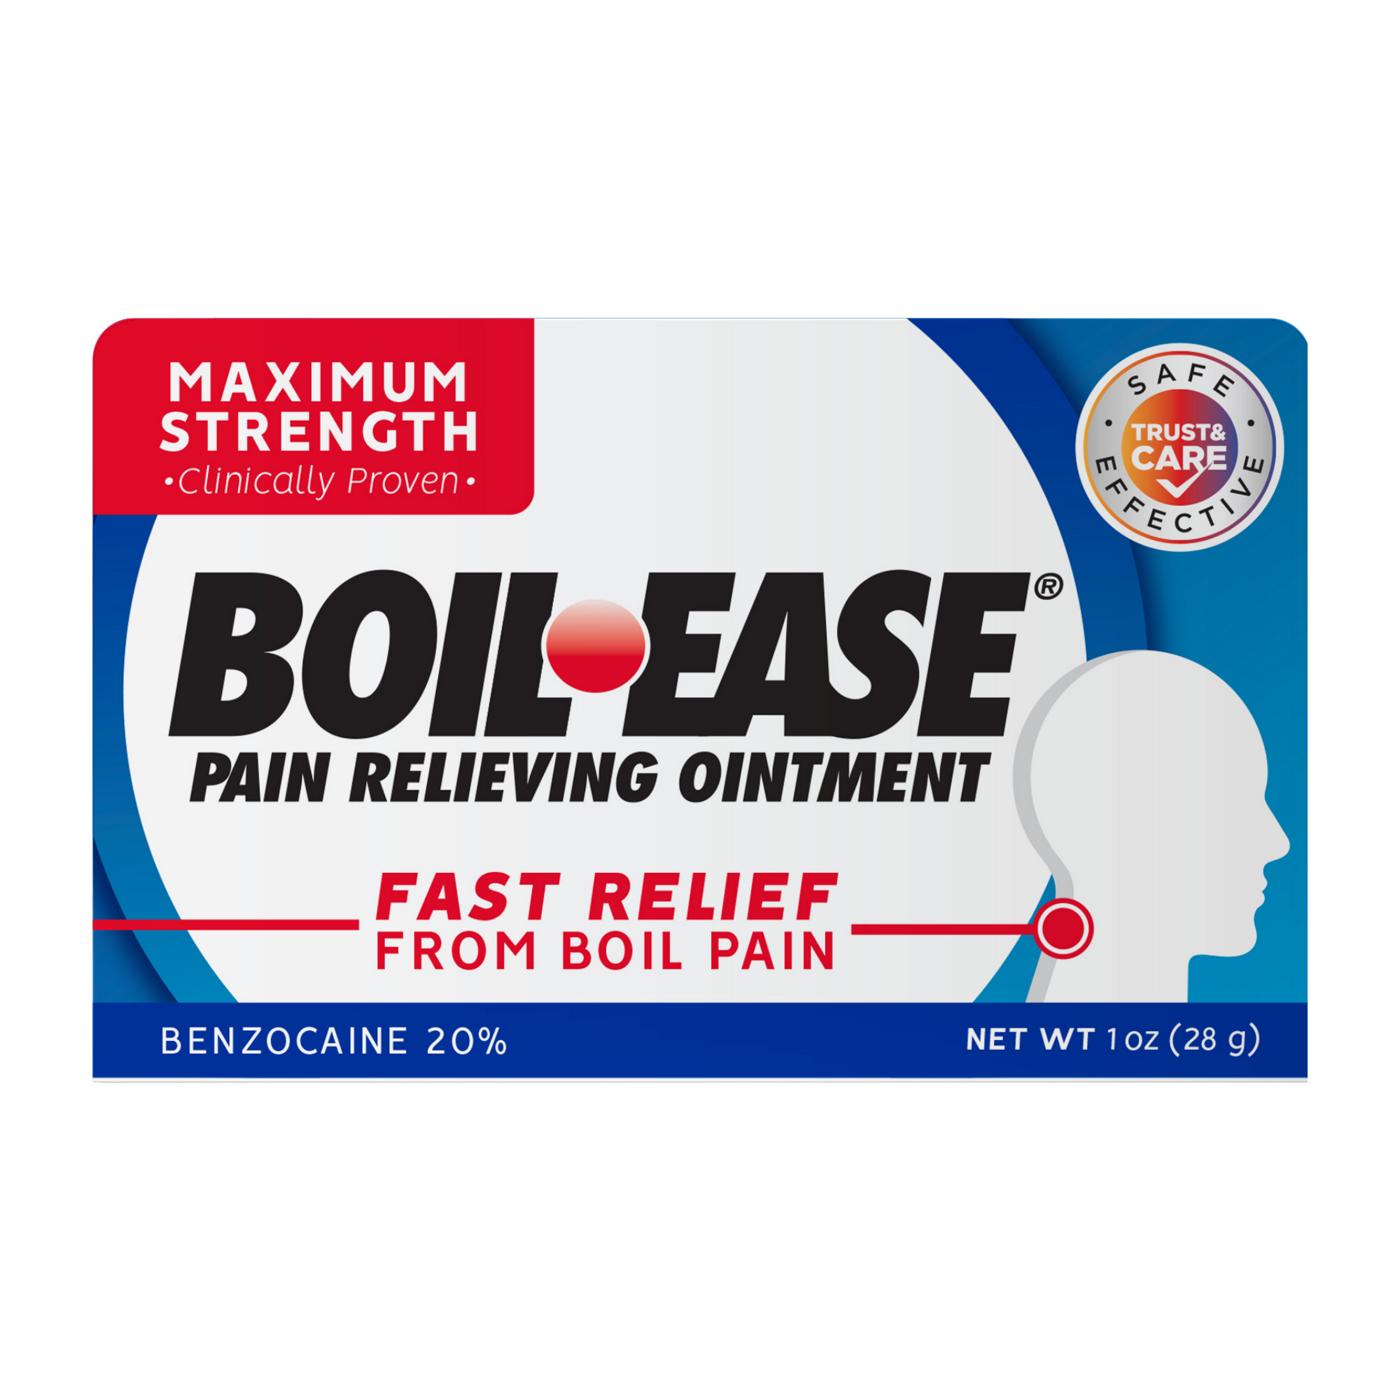 Boil-Ease Maximum Strength Pain Relieving Ointment; image 1 of 5